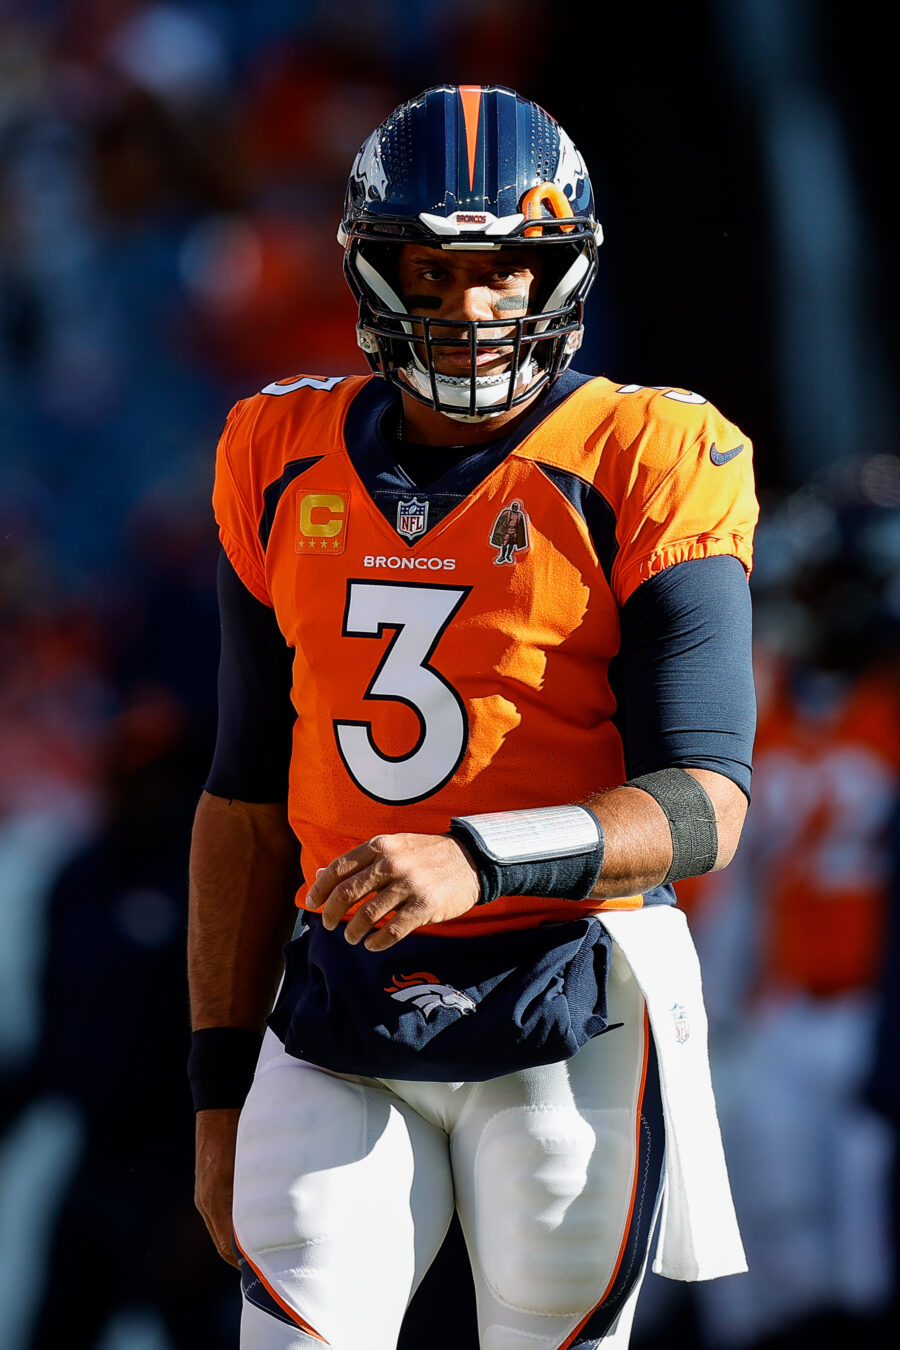 Latest On Broncos, Russell Wilson